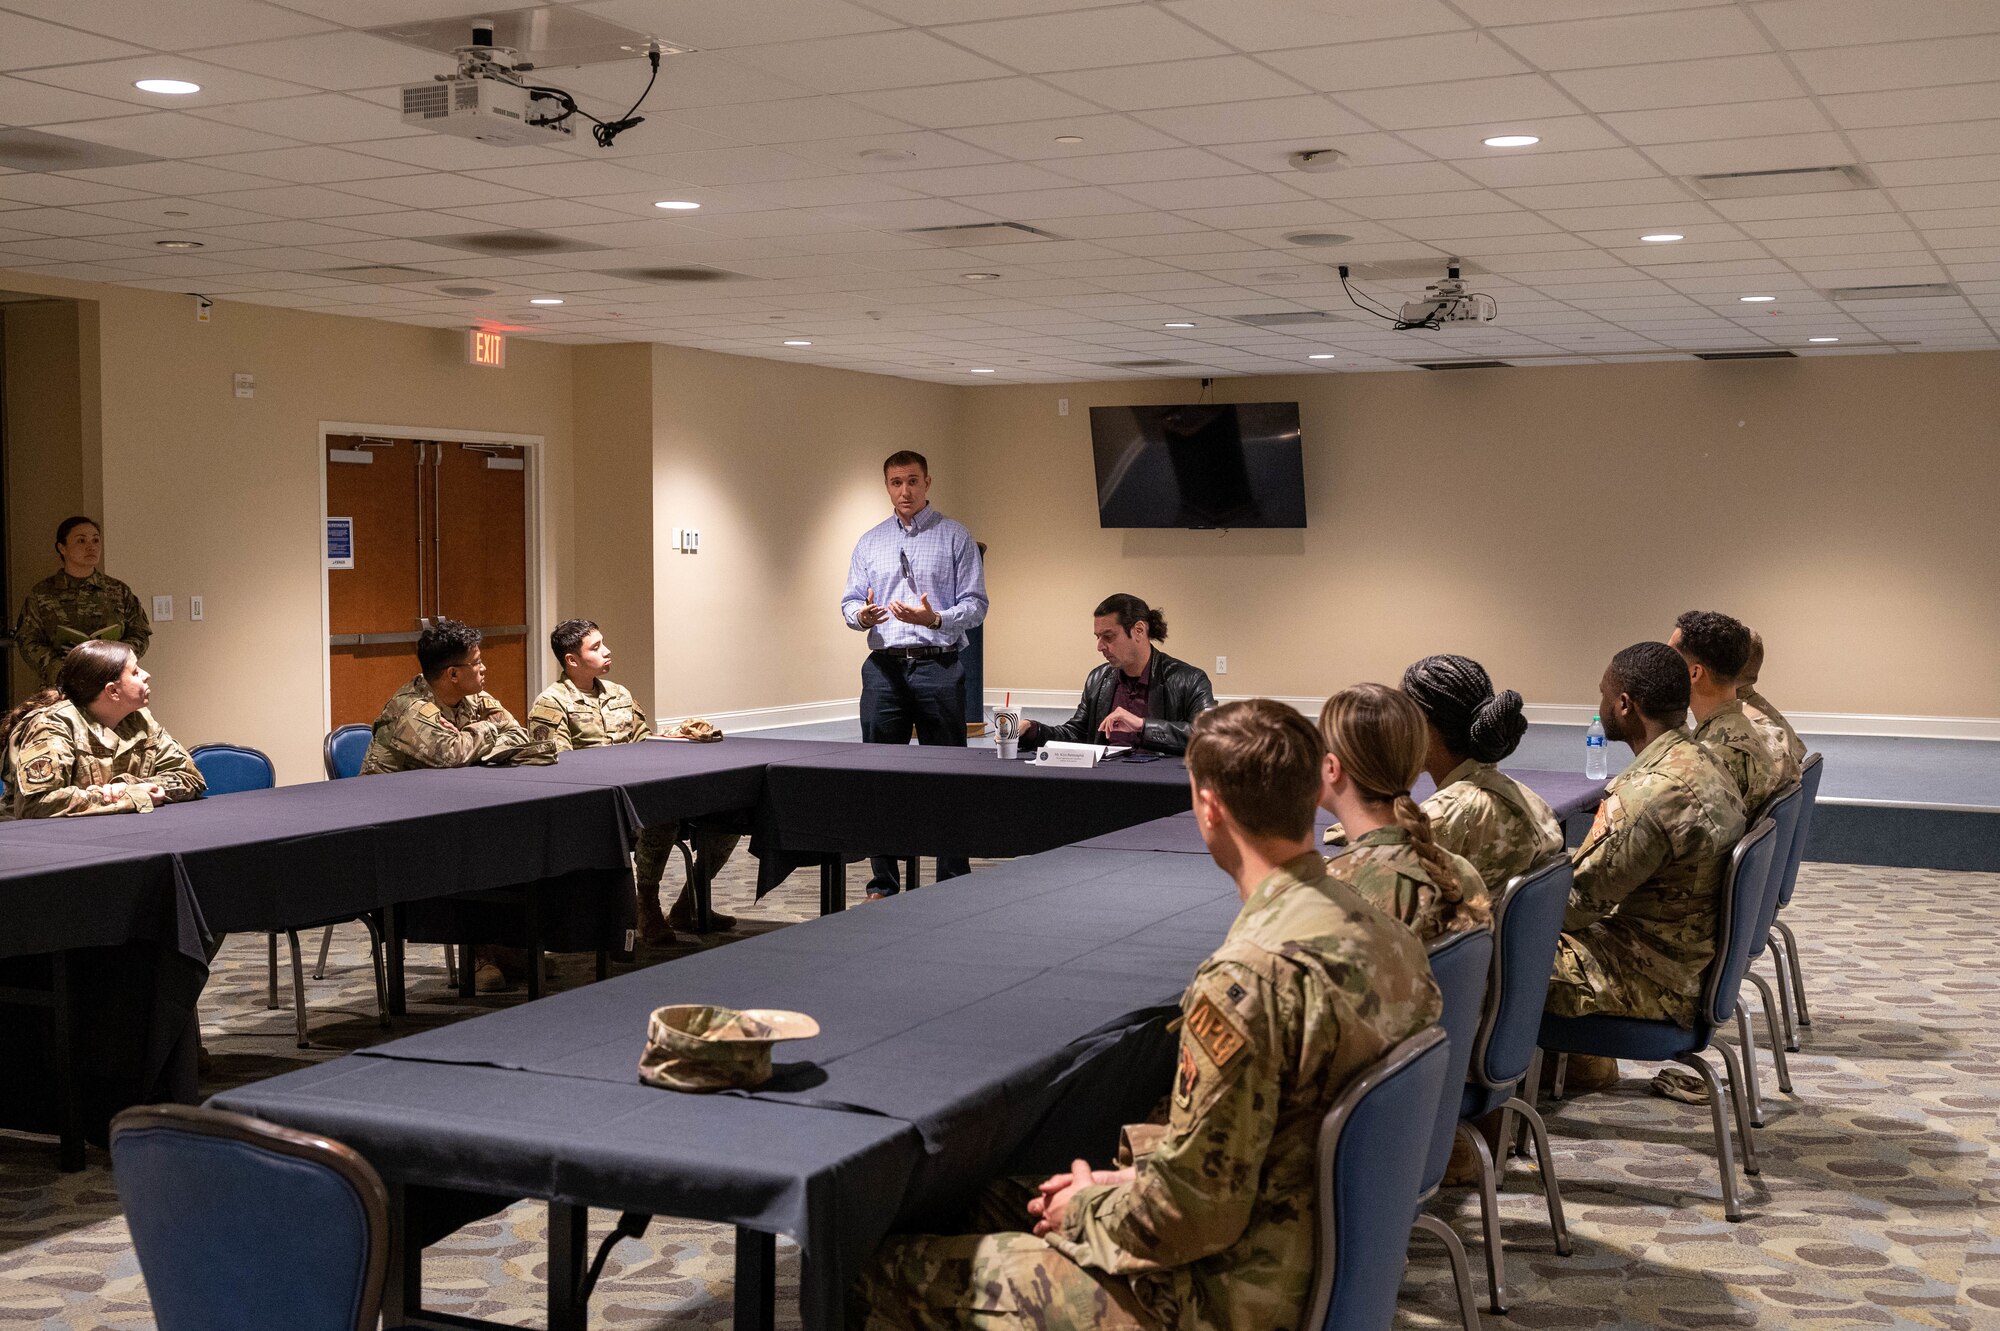 U.S. Army Capt. Tom Dickson welcomes Airmen assigned to the 4th Fighter Wing to a junior enlisted panel hosted by Kiya Batmanglidj, House Appropriations committee member, at Seymour Johnson Air Force Base, North Carolina, Feb. 23, 2023. The panel allowed participants to voice any concerns or challenges that impacted their quality of life. (U.S. Air Force photo by Senior Airman Taylor Hunter)